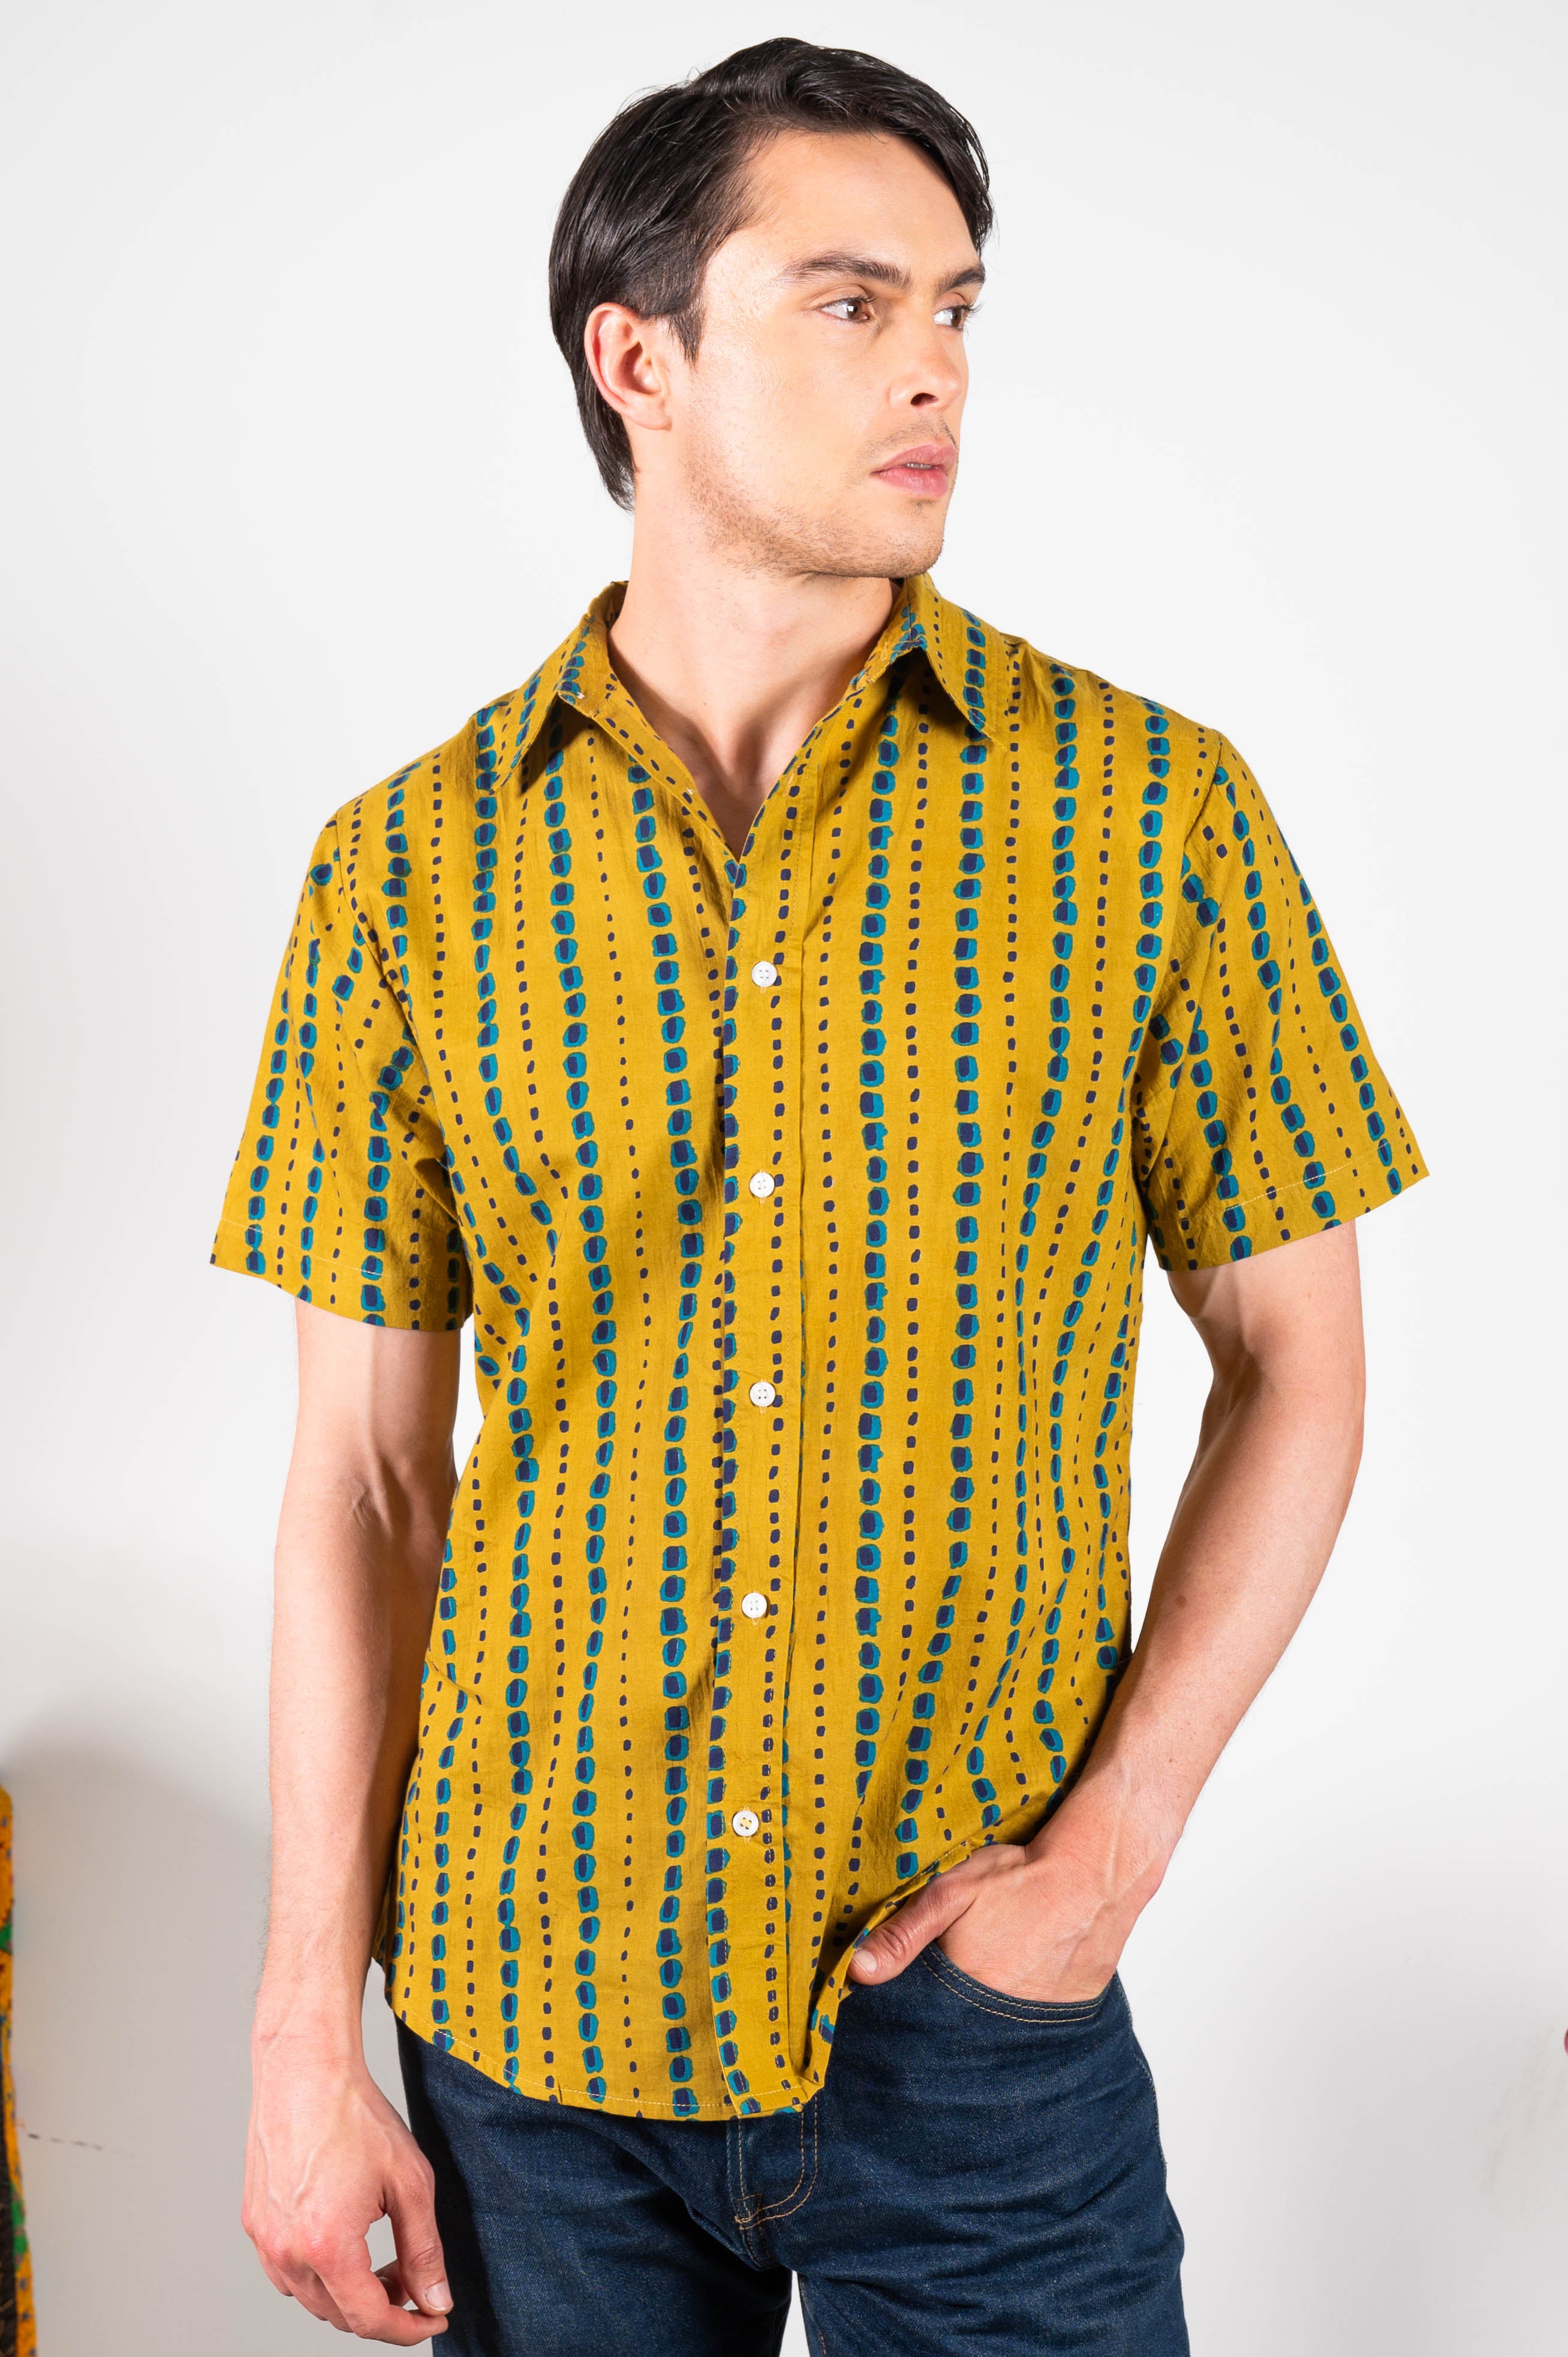 Hand Printed 'The Sheril' Short Sleeve Shirt in Mustard and Teal Print